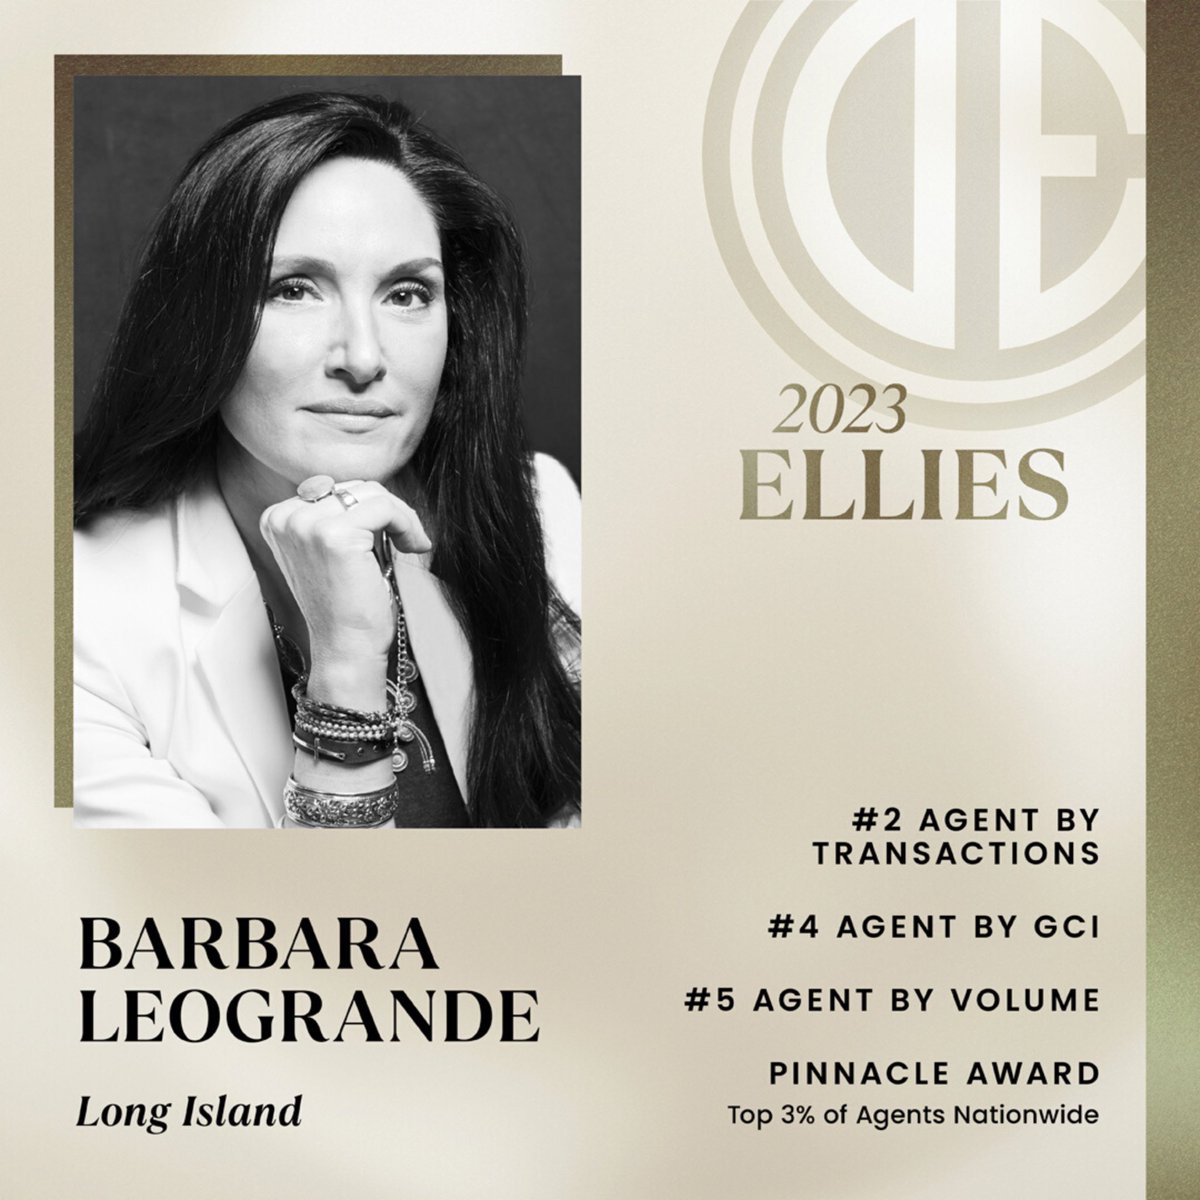 I look forward to another year of servitude and connectivity with the promise of absolute devotion to you and your home! ✨ #TheEllies2023 #DouglasElliman #EllimanAgents #TheNextMoveIsYours ❤️🏠
.
.
.
.
#SoldByBarbara #CallBarbara #ILoveWhatIDo #ListenToYourBroker #ListWithMe